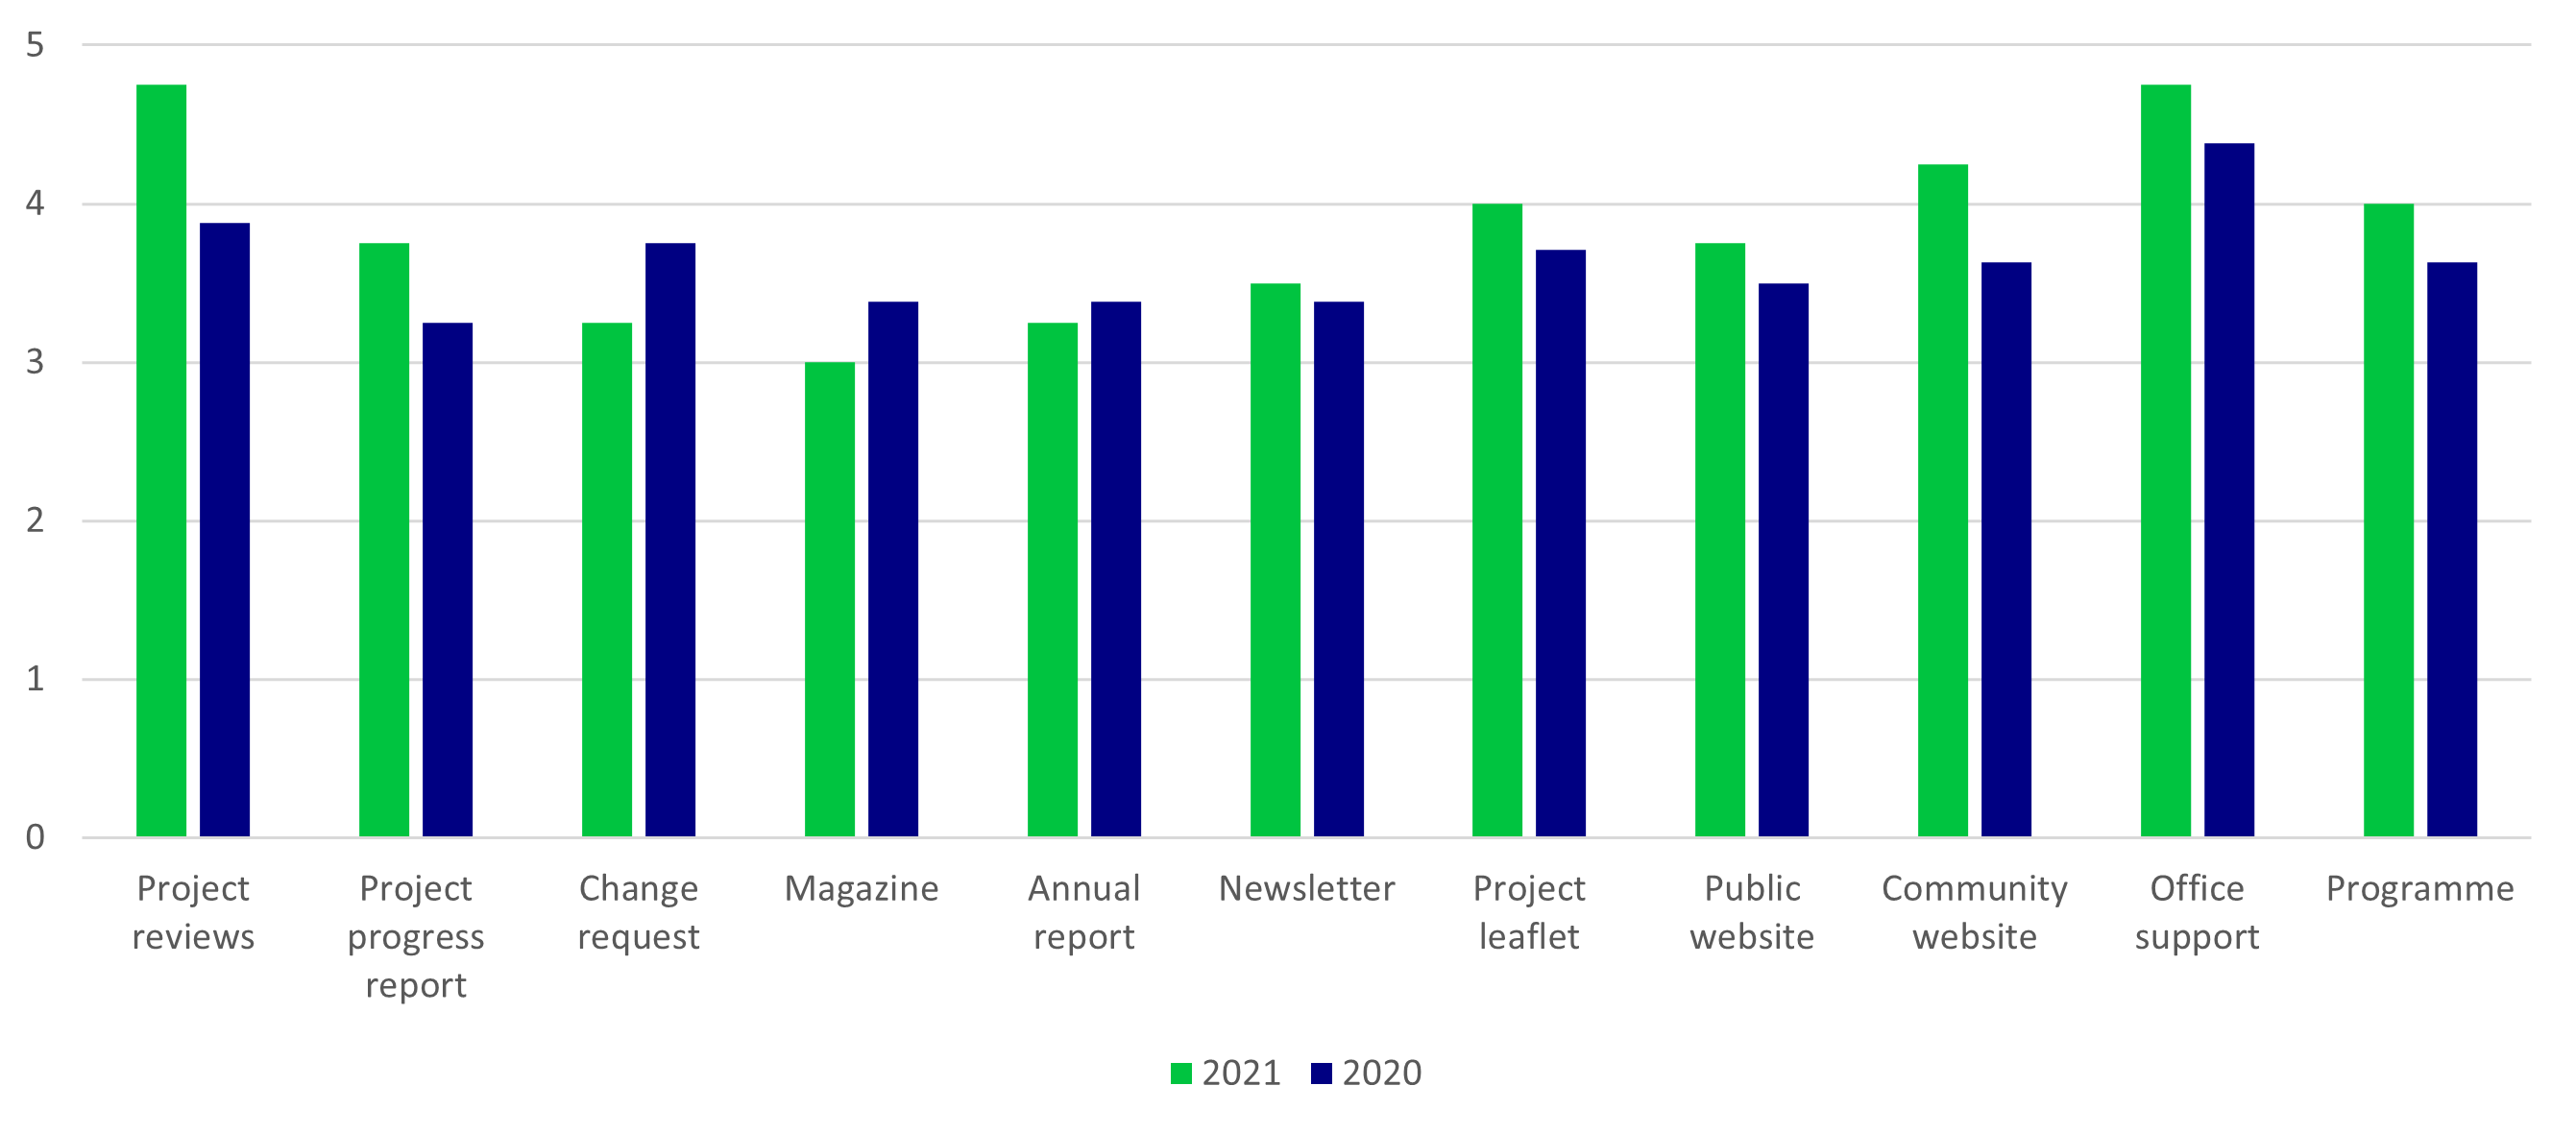 Graph showing results of Project leader satisfaction survey